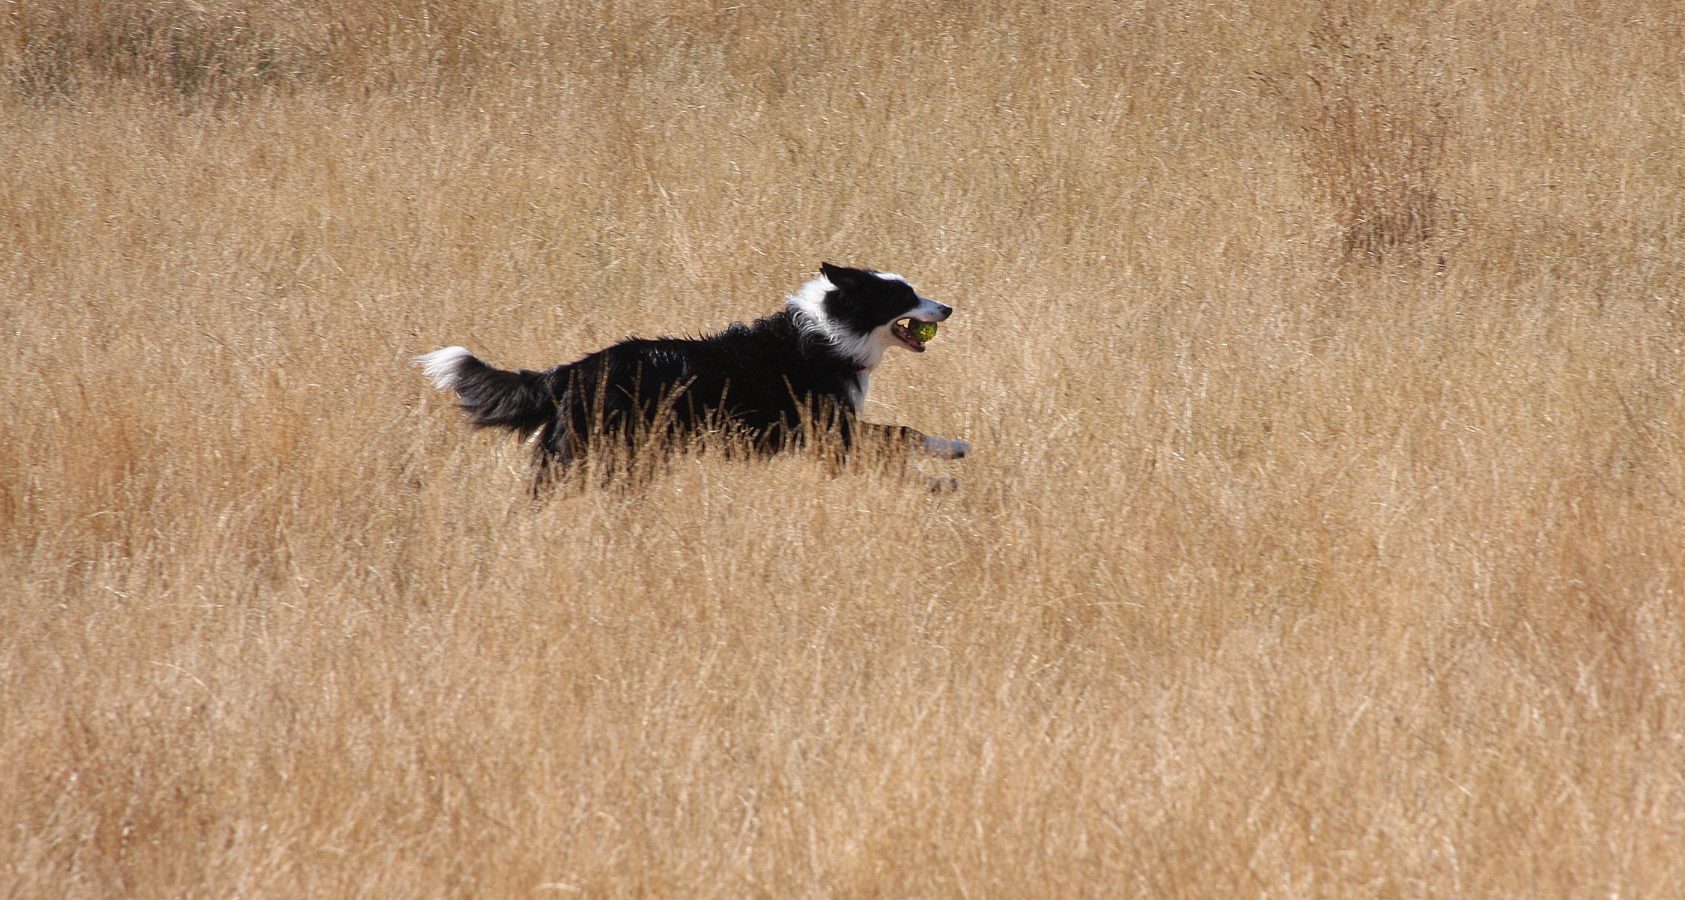 Why Are Border Collies So Smart? The Smartest Dog Breed?